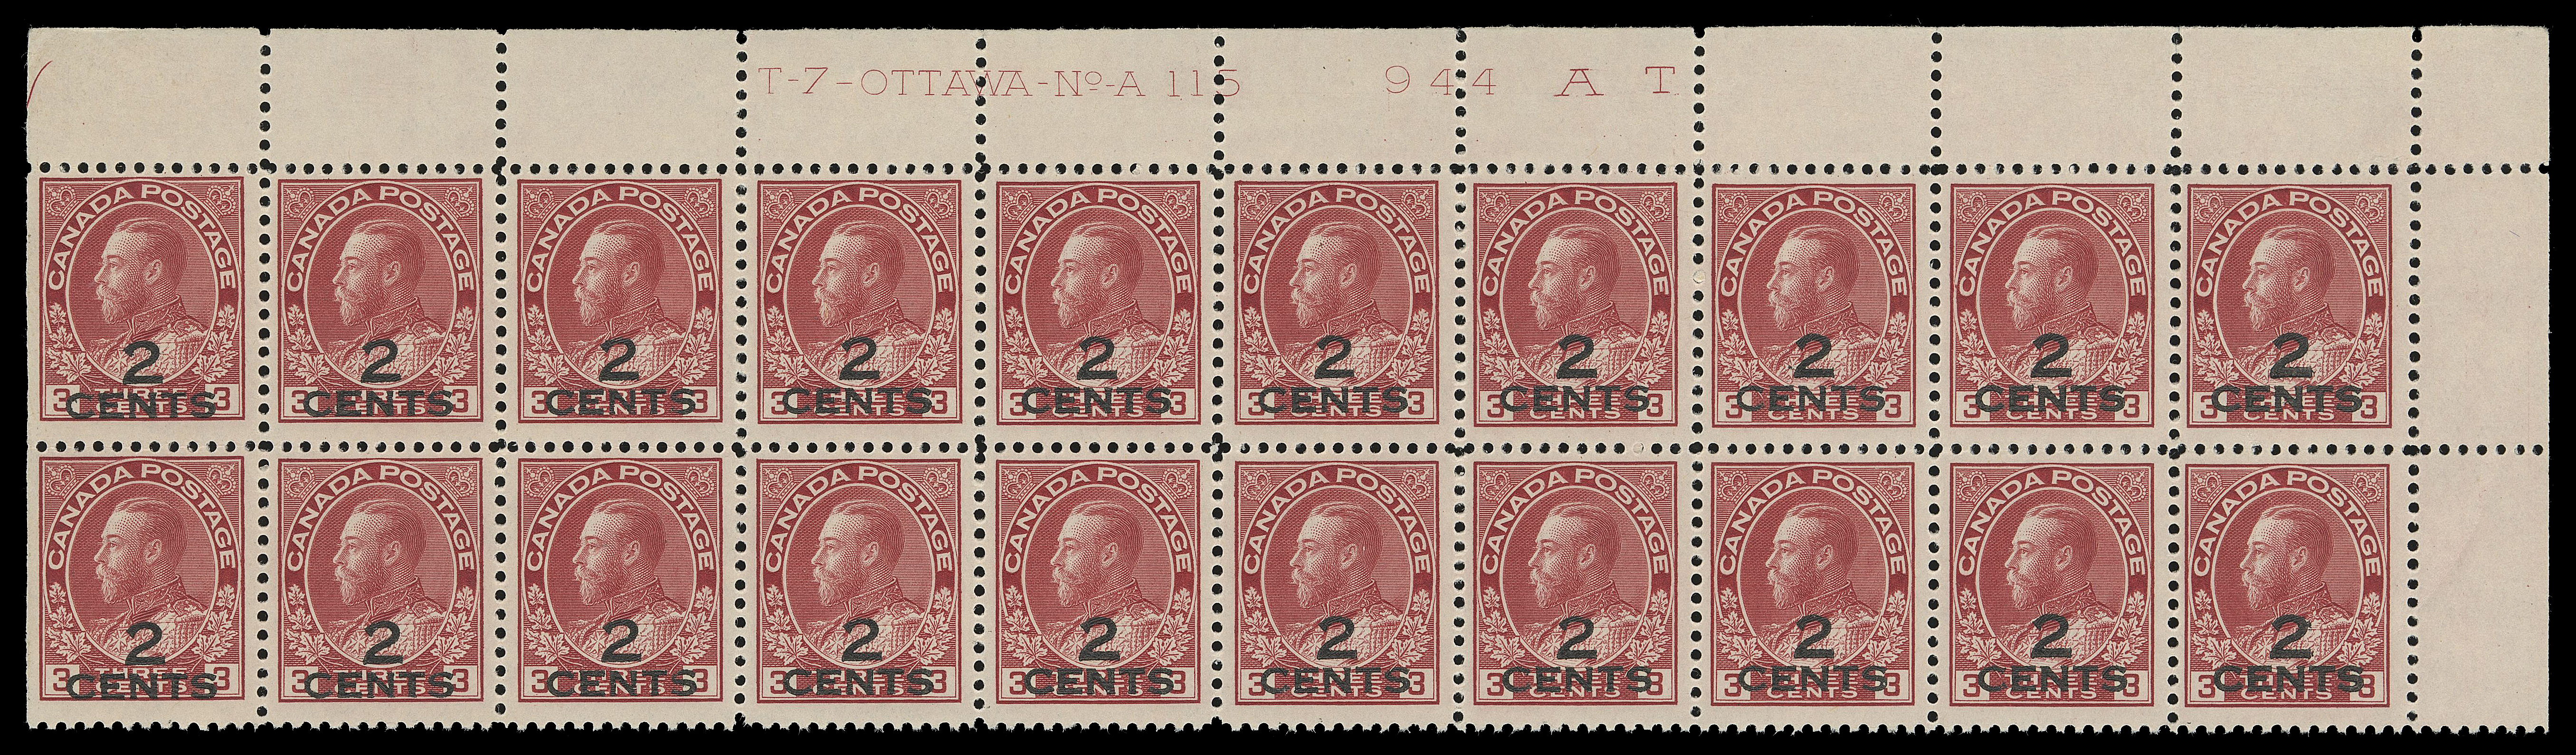 ADMIRAL STAMPS  140,A quite well centered and fresh upper right Plate 115 block of twenty, light gum crease on lower right stamp; one stamp has fingerprint on gum, otherwise F-VF NH (Unitrade cat. $1,485)